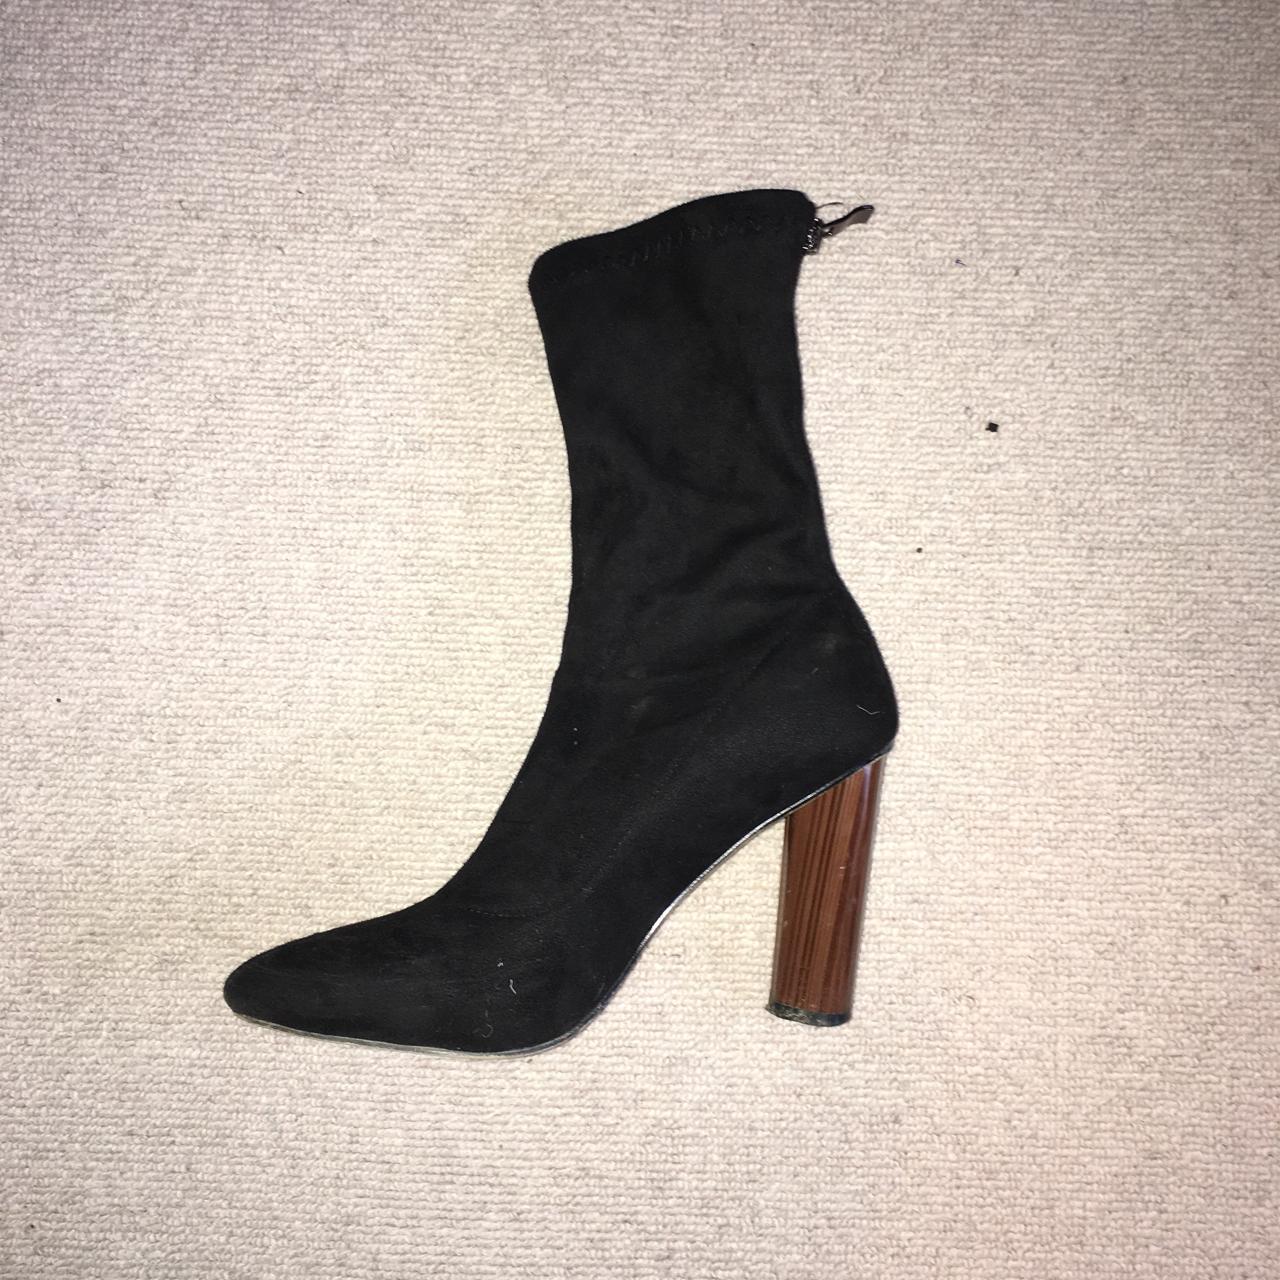 EGO BLACK FAUX SUEDE HEELED MID CALF BOOTS... - Depop